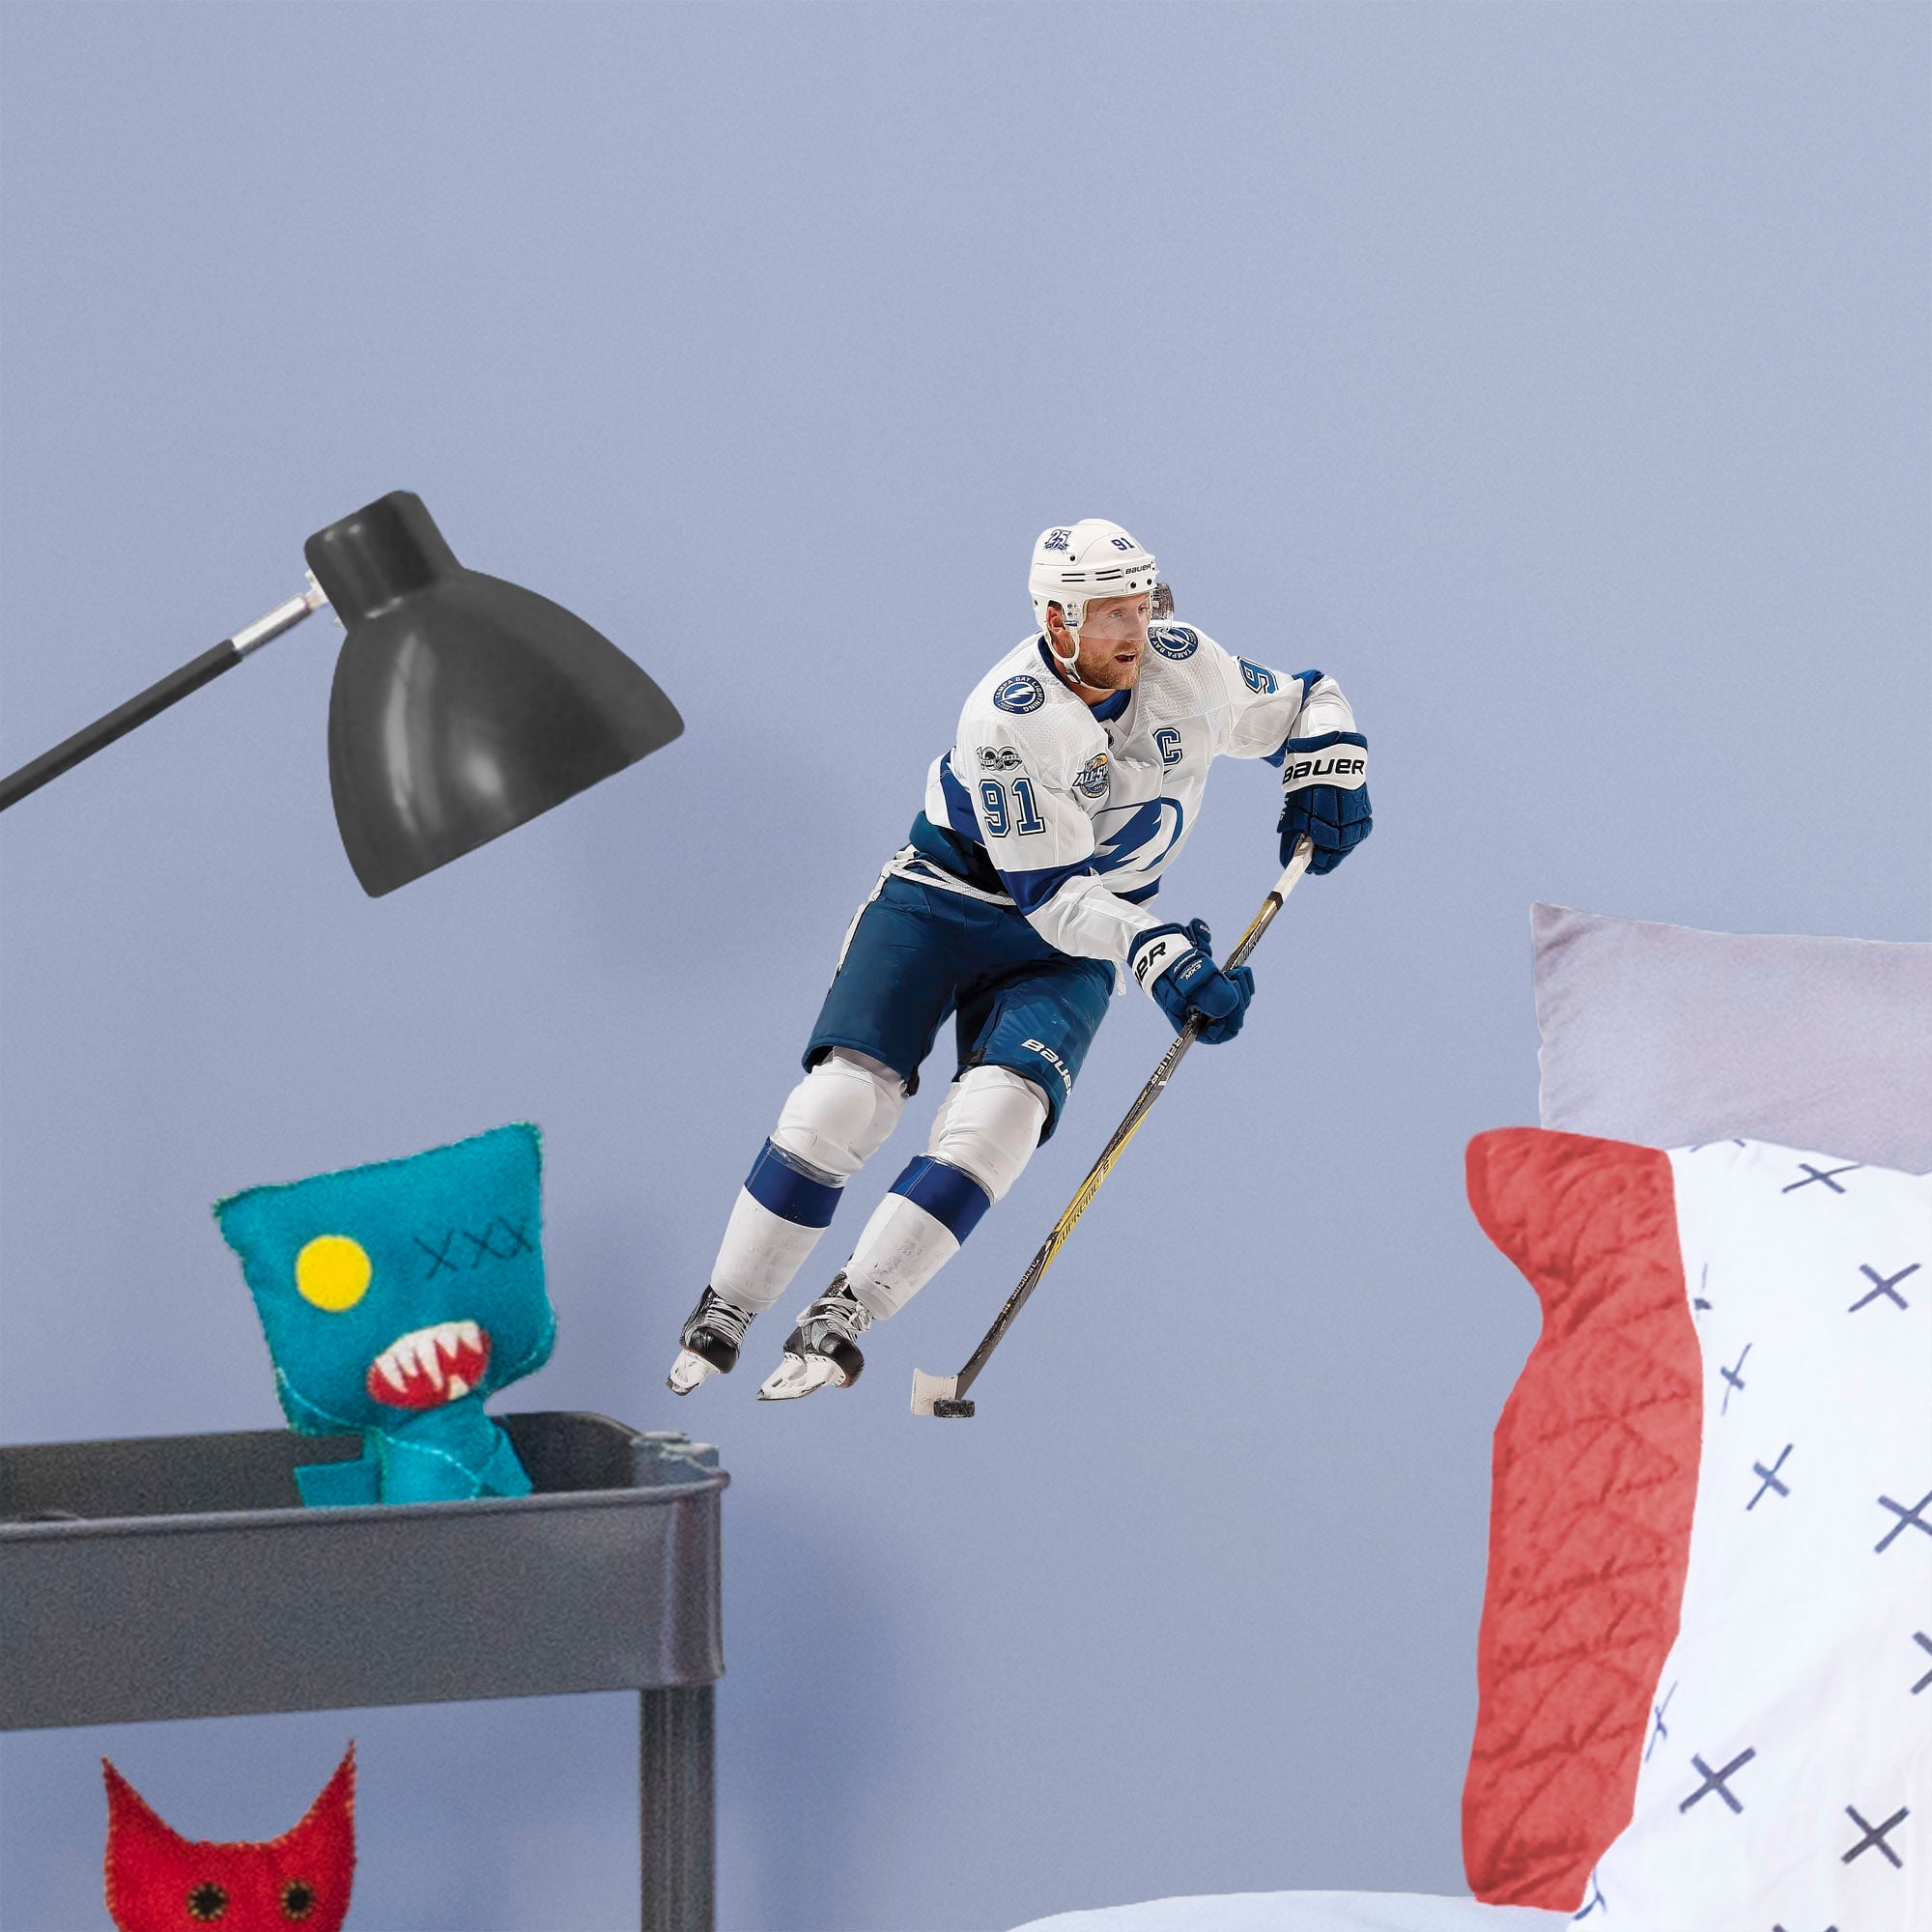 Steven Stamkos for Tampa Bay Lightning - Officially Licensed NHL Removable Wall Decal Large by Fathead | Vinyl